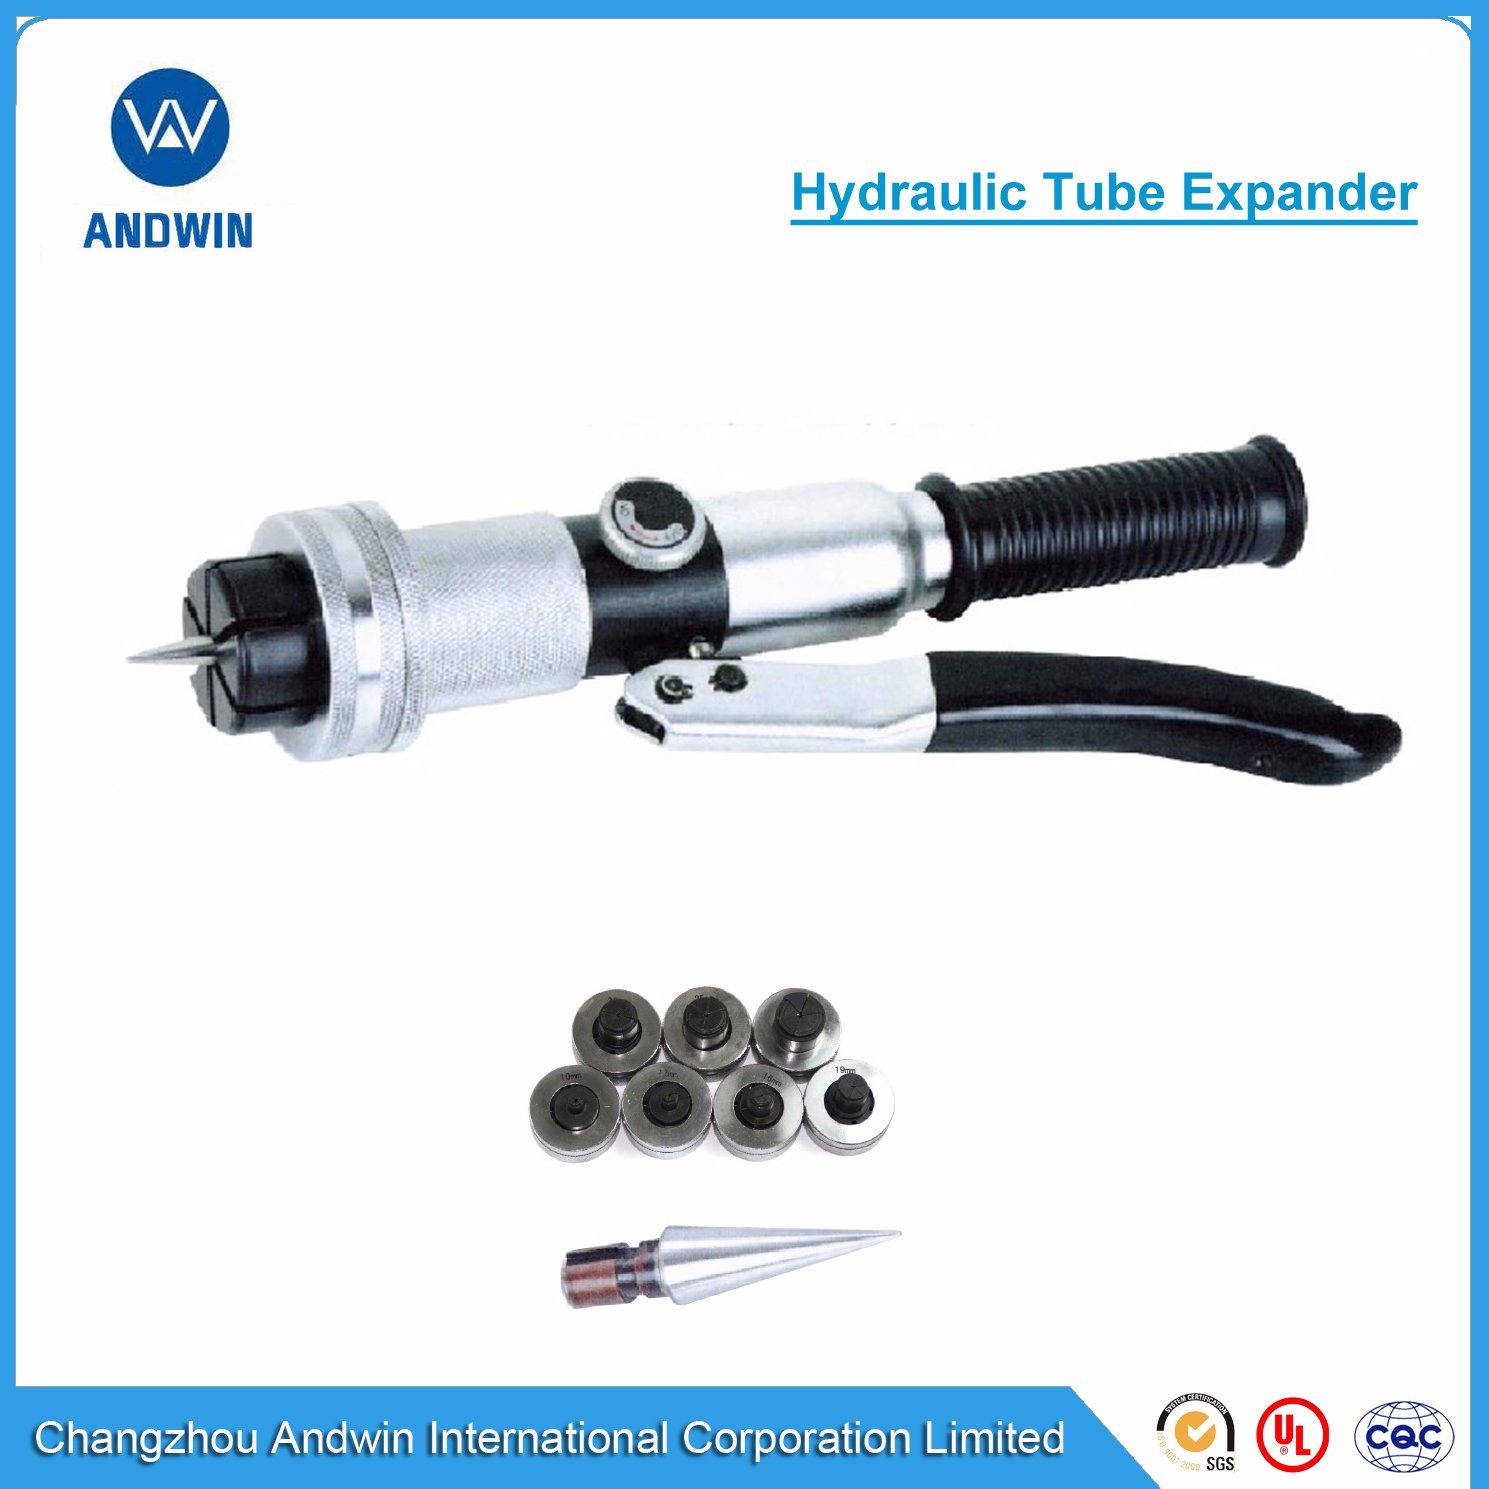 Copper Tube and Refrigeartion Hand Tools, Hydraulic Tube Expander